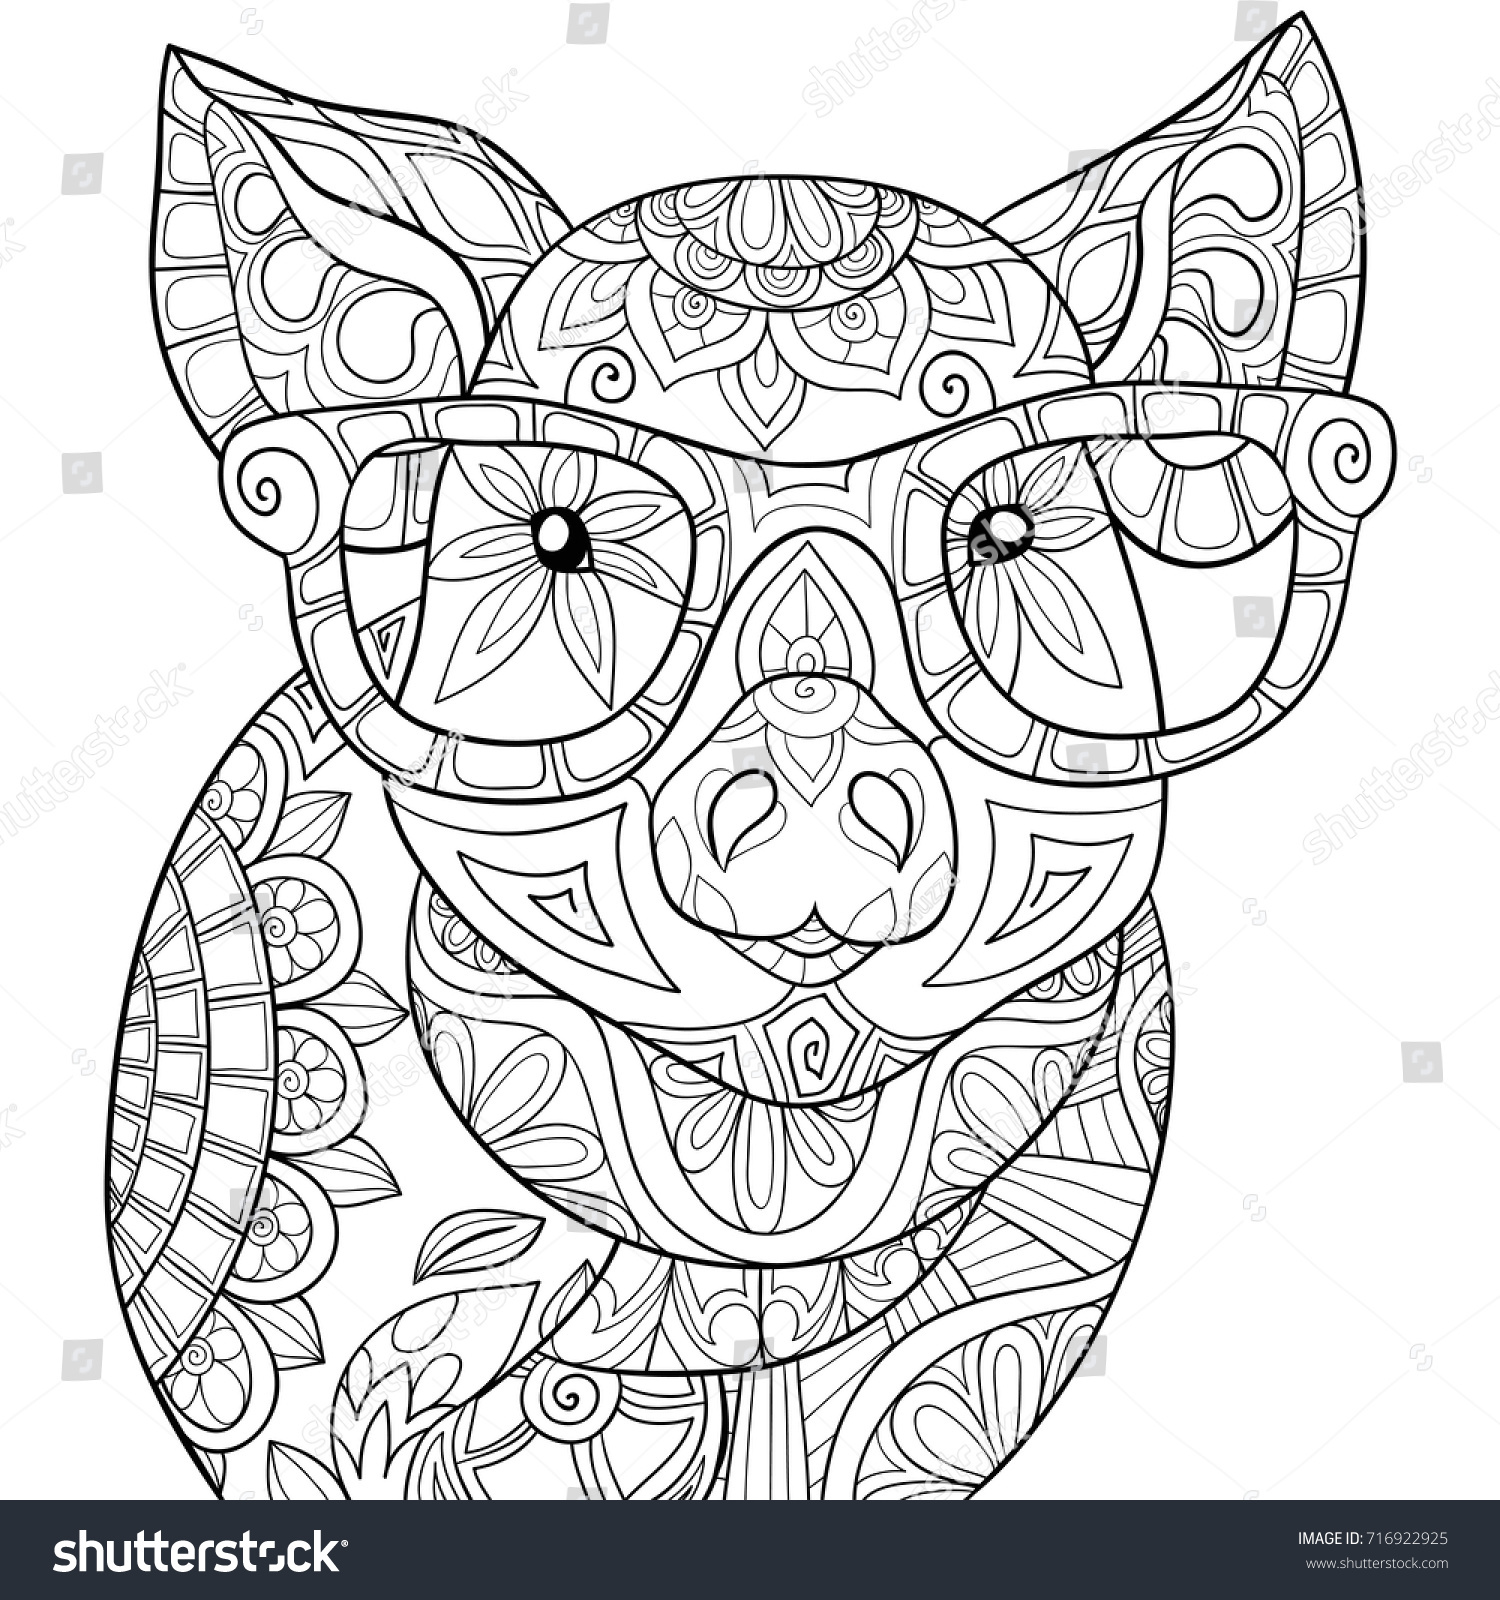 Adult coloring page book a pig Zen style art illustration